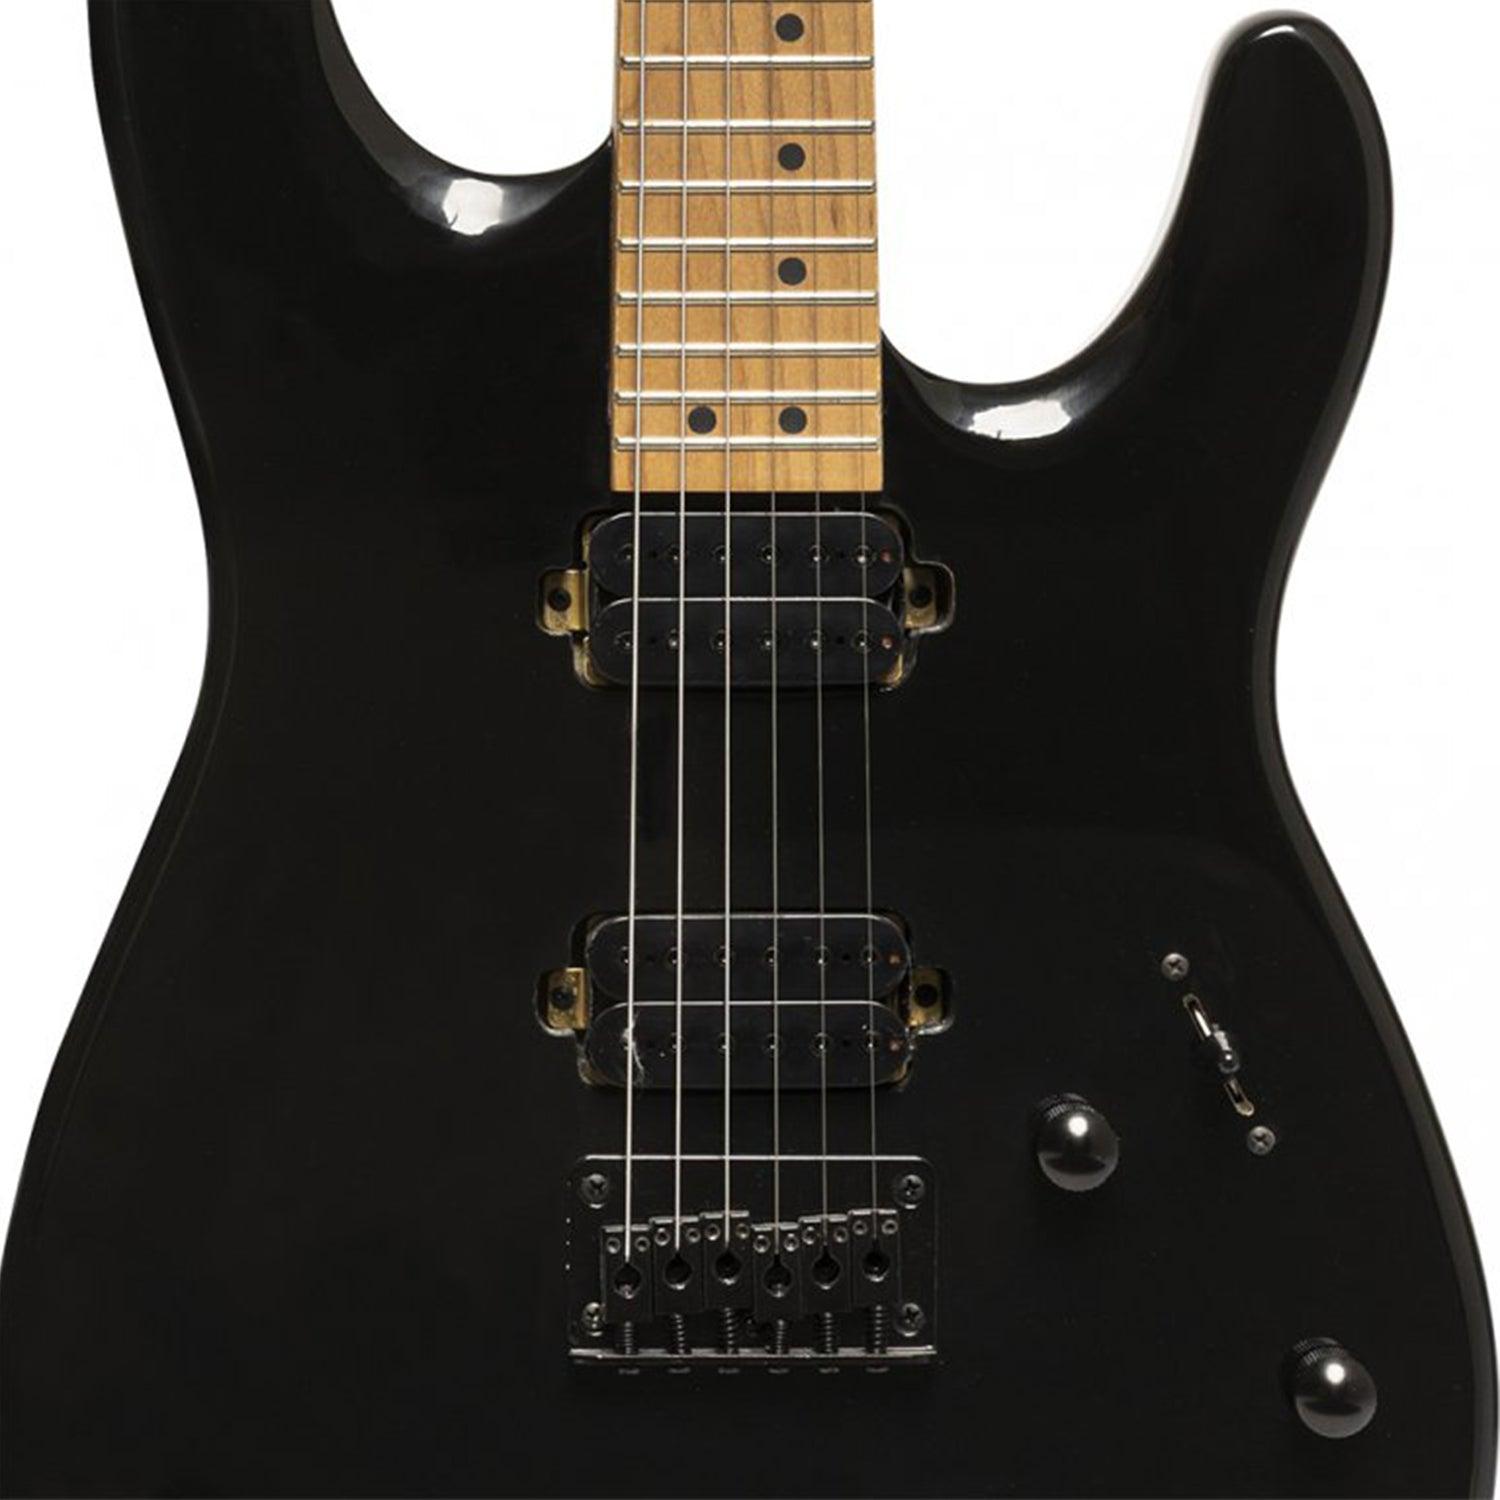 Stagg SEM-TWO H BK Metal series Electric Guitar with solid mahogany body - DY Pro Audio